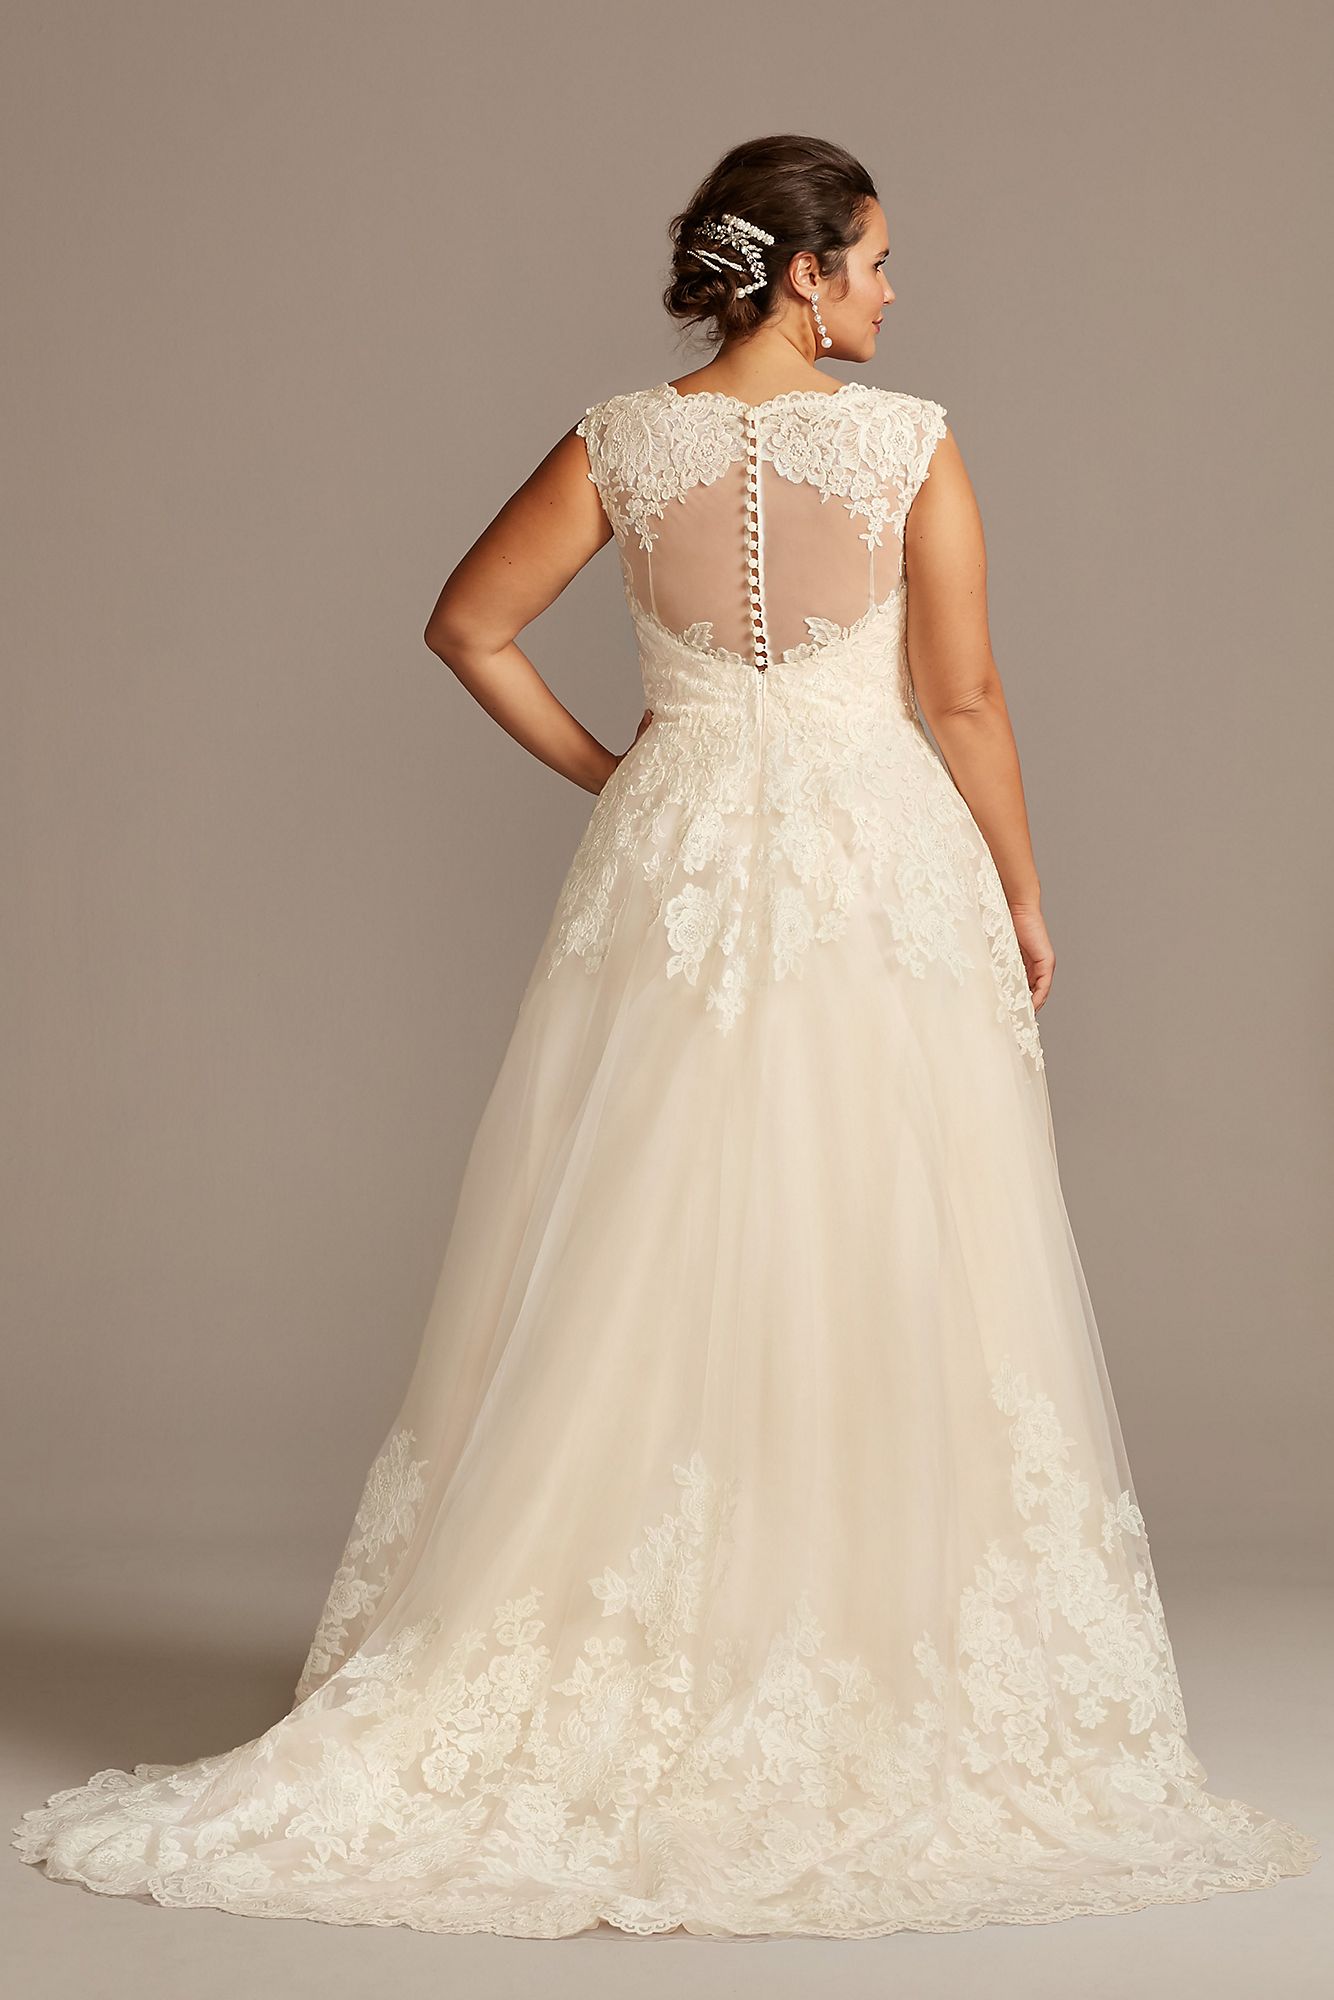 Scalloped Lace and Tulle Plus Size Wedding Dress   Collection 9WG3850